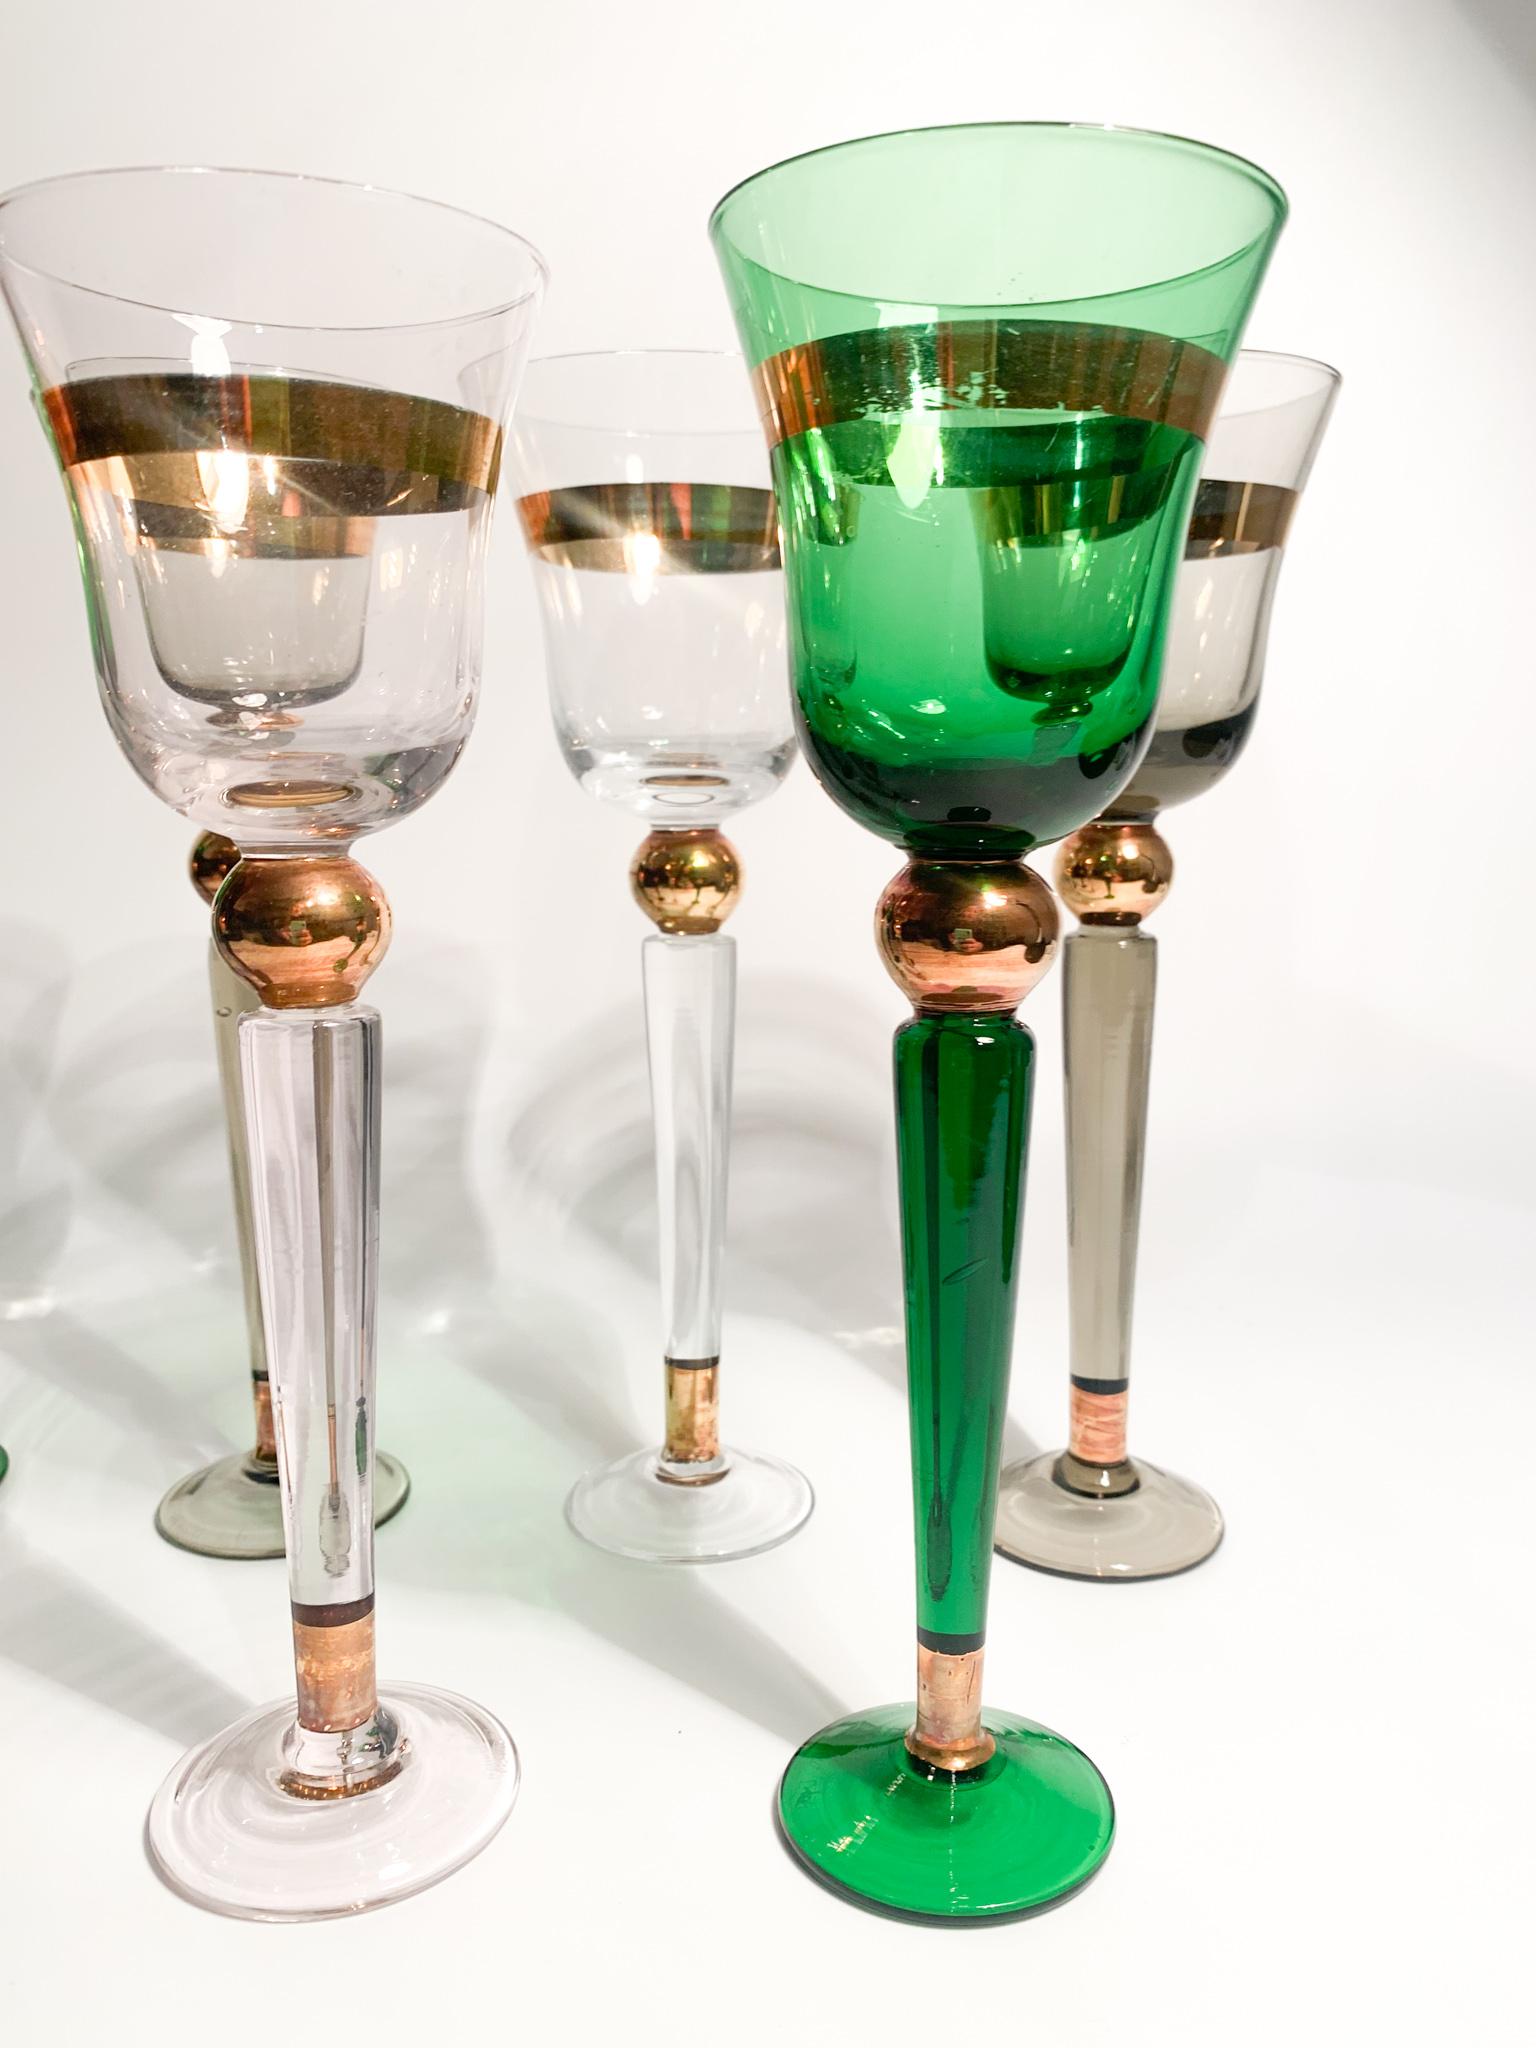 Set of 6 Venini Multicolored Murano Glass Goblets from the 1950s For Sale 12